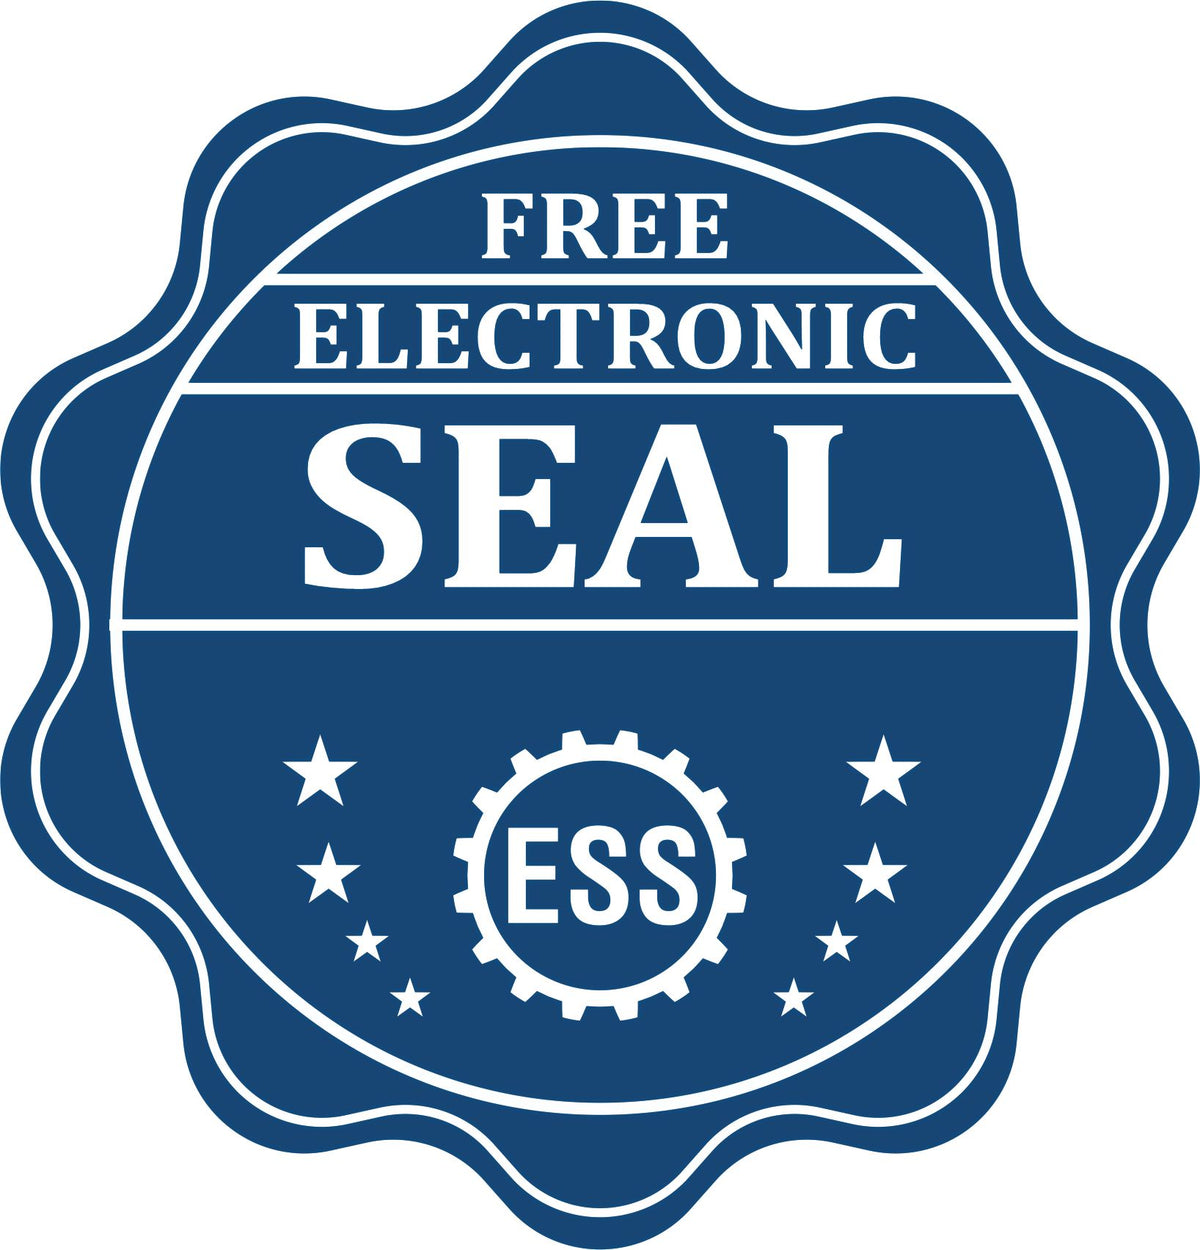 A badge showing a free electronic seal for the Heavy Duty Cast Iron Maryland Land Surveyor Seal Embosser with stars and the ESS gear on the emblem.